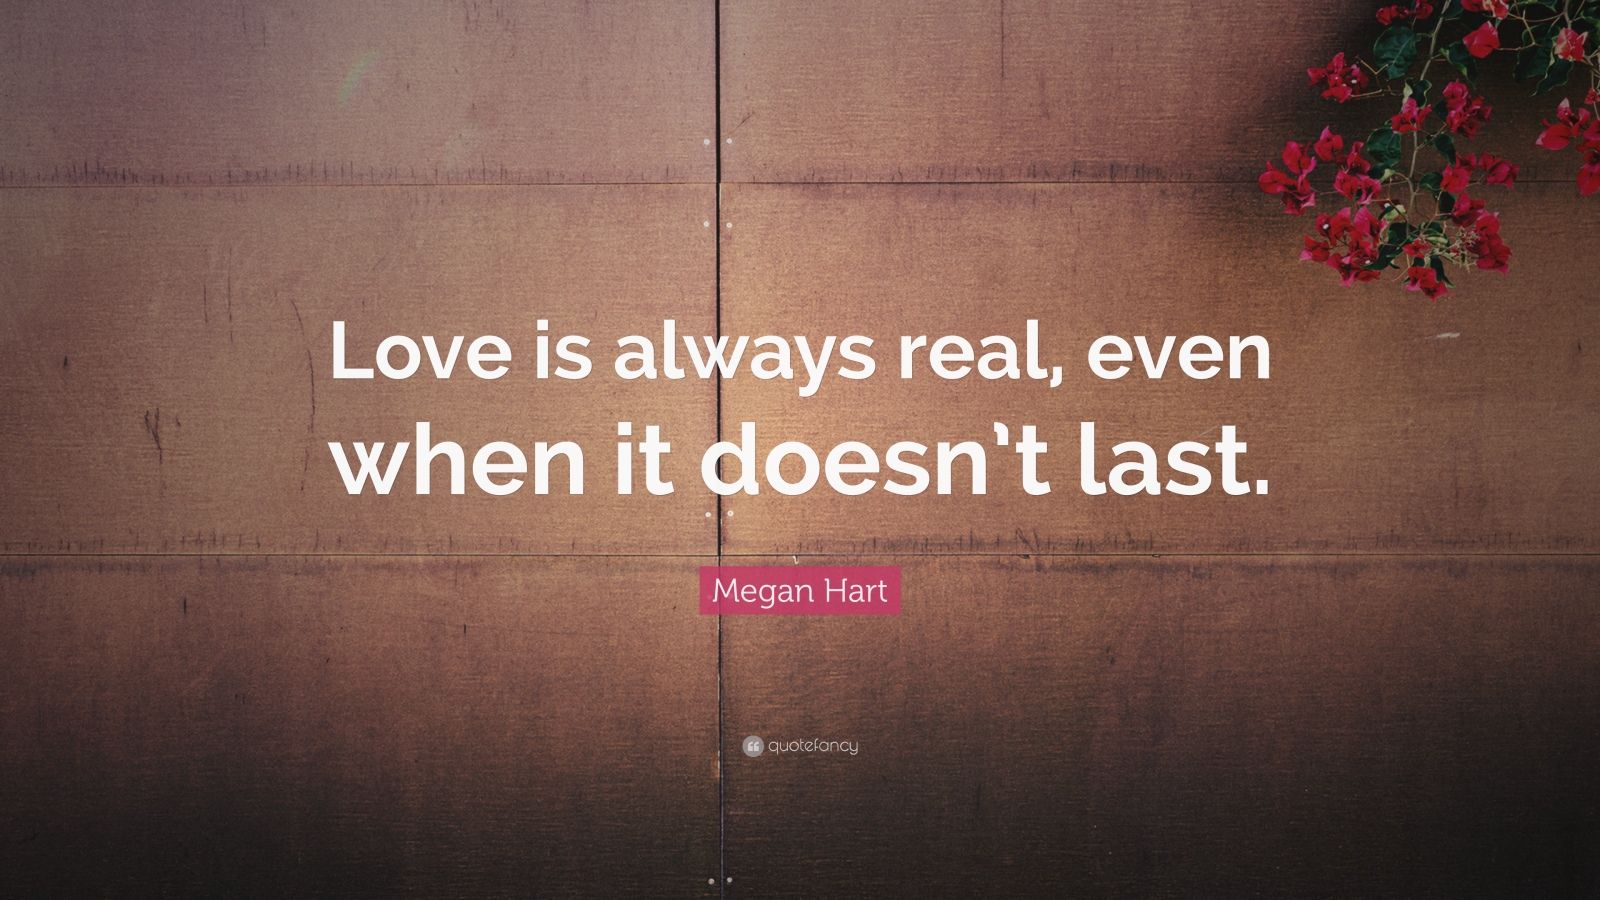 Megan Hart Quote “Love is always real even when it doesn t